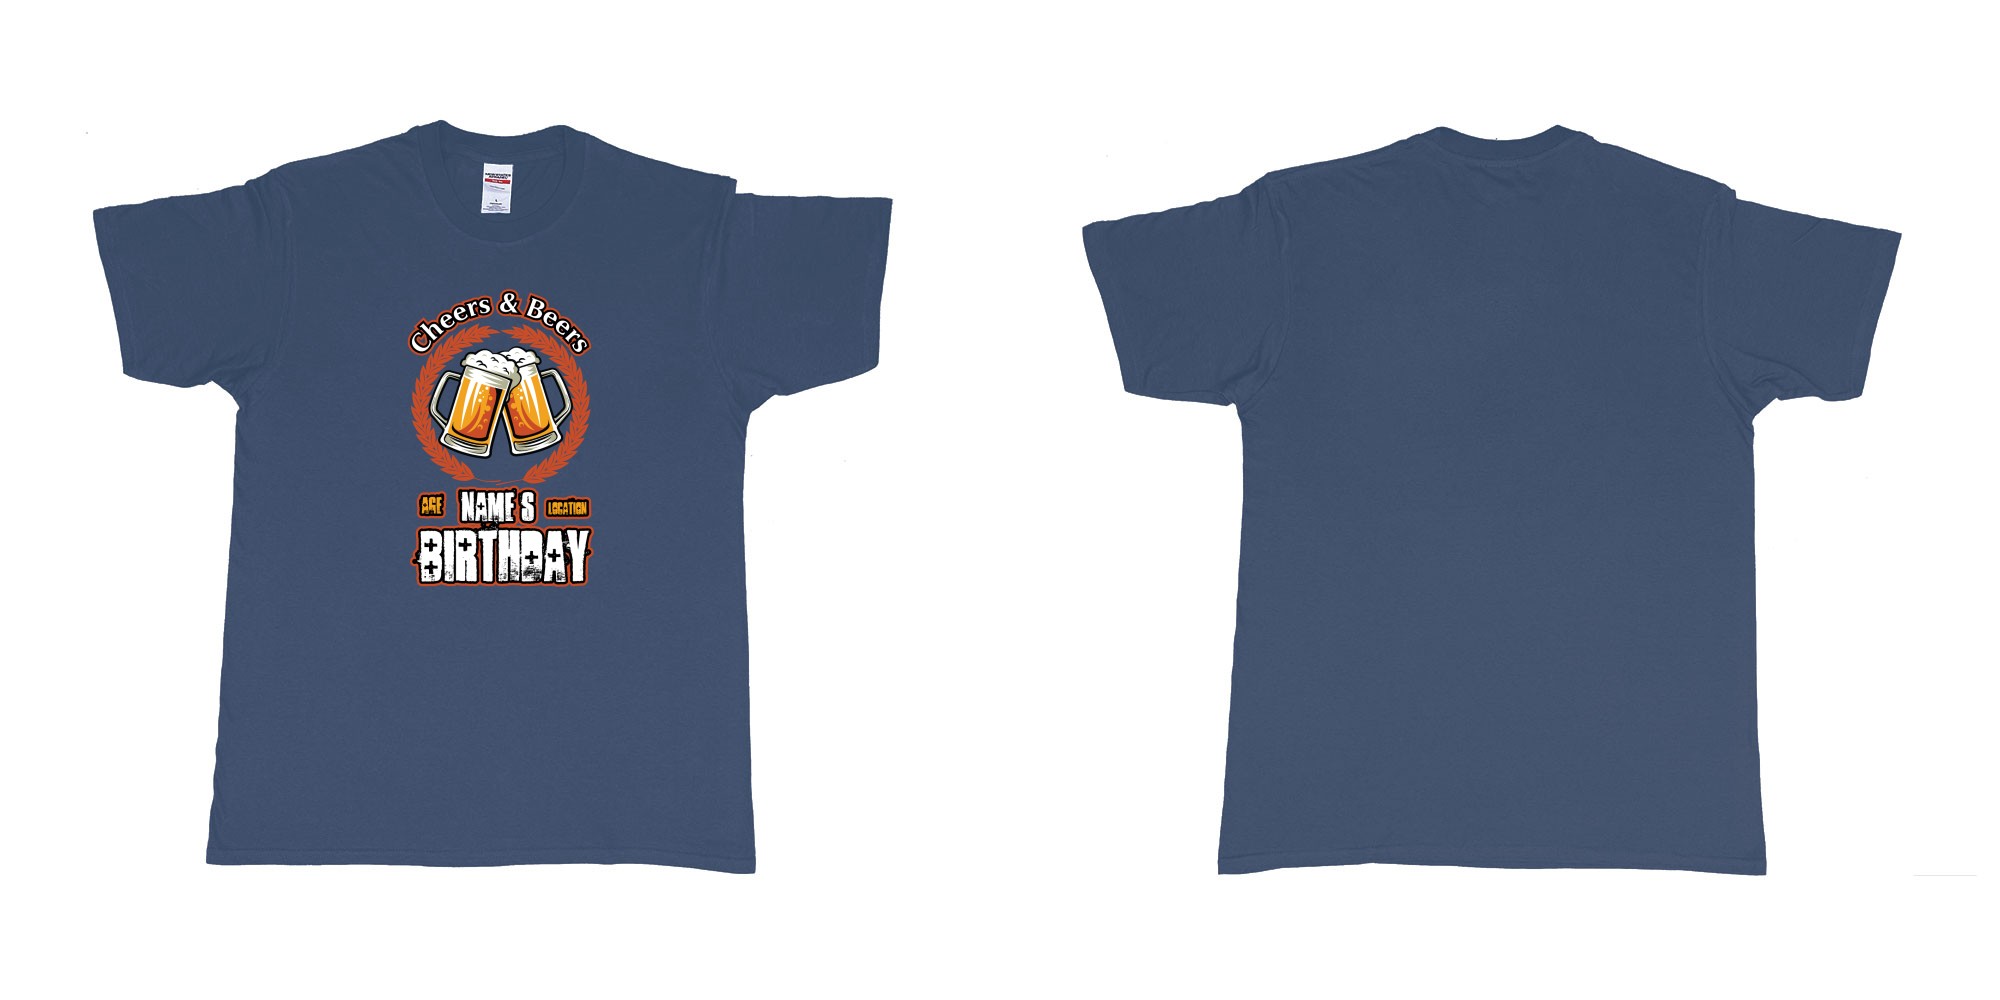 Custom tshirt design cheers and beers birthday in fabric color navy choice your own text made in Bali by The Pirate Way